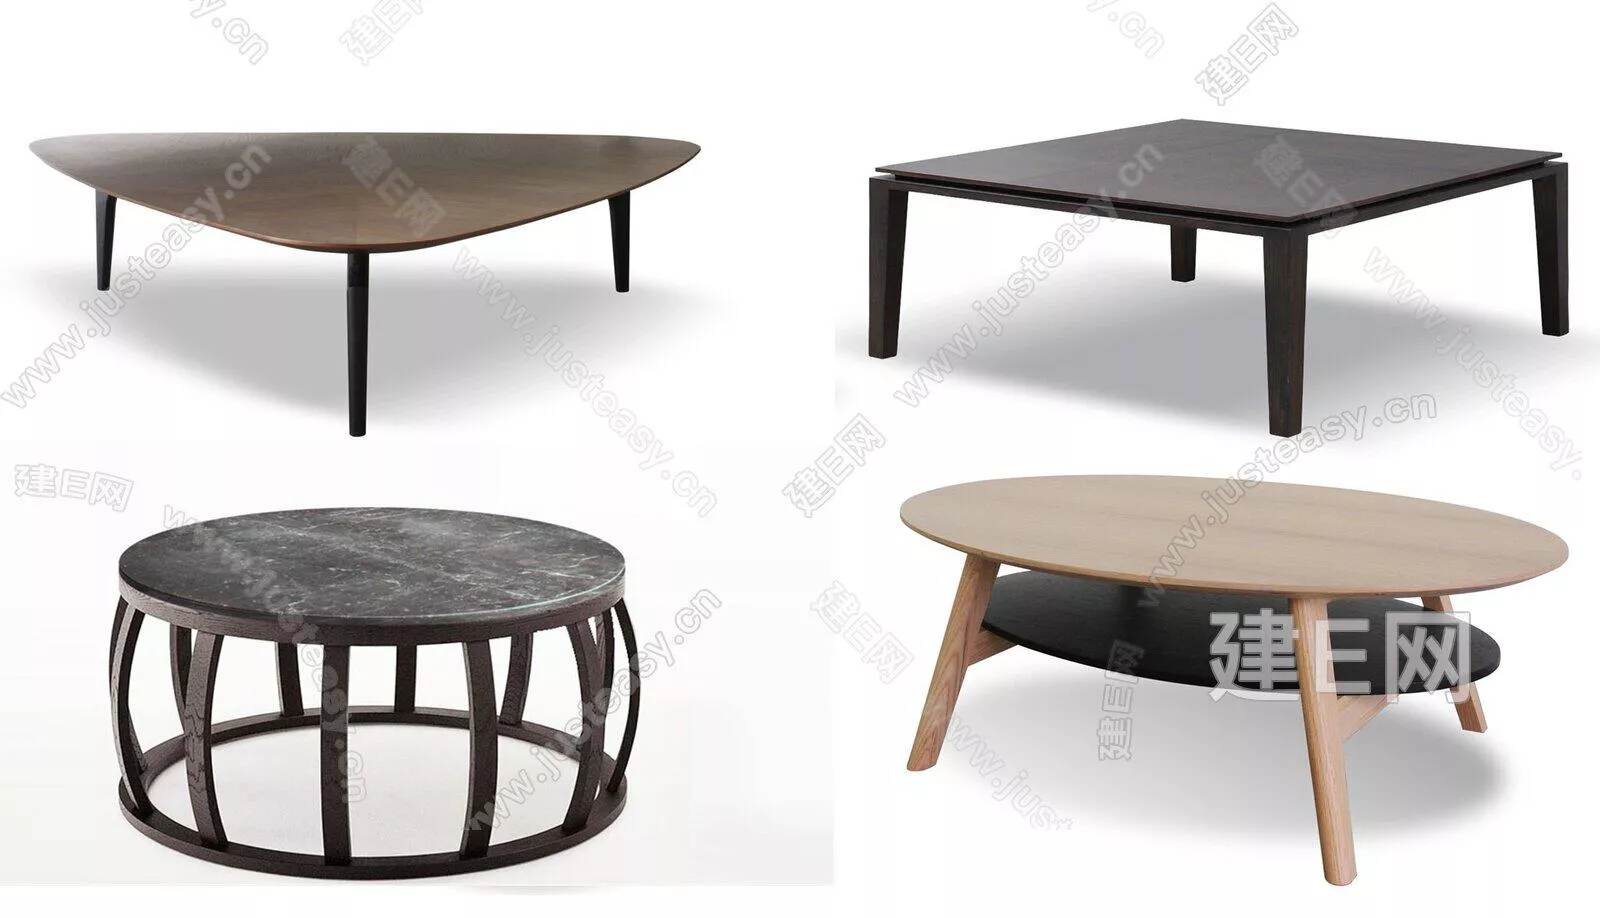 MODERN COFFEE TABLE - SKETCHUP 3D MODEL - ENSCAPE - 112217371